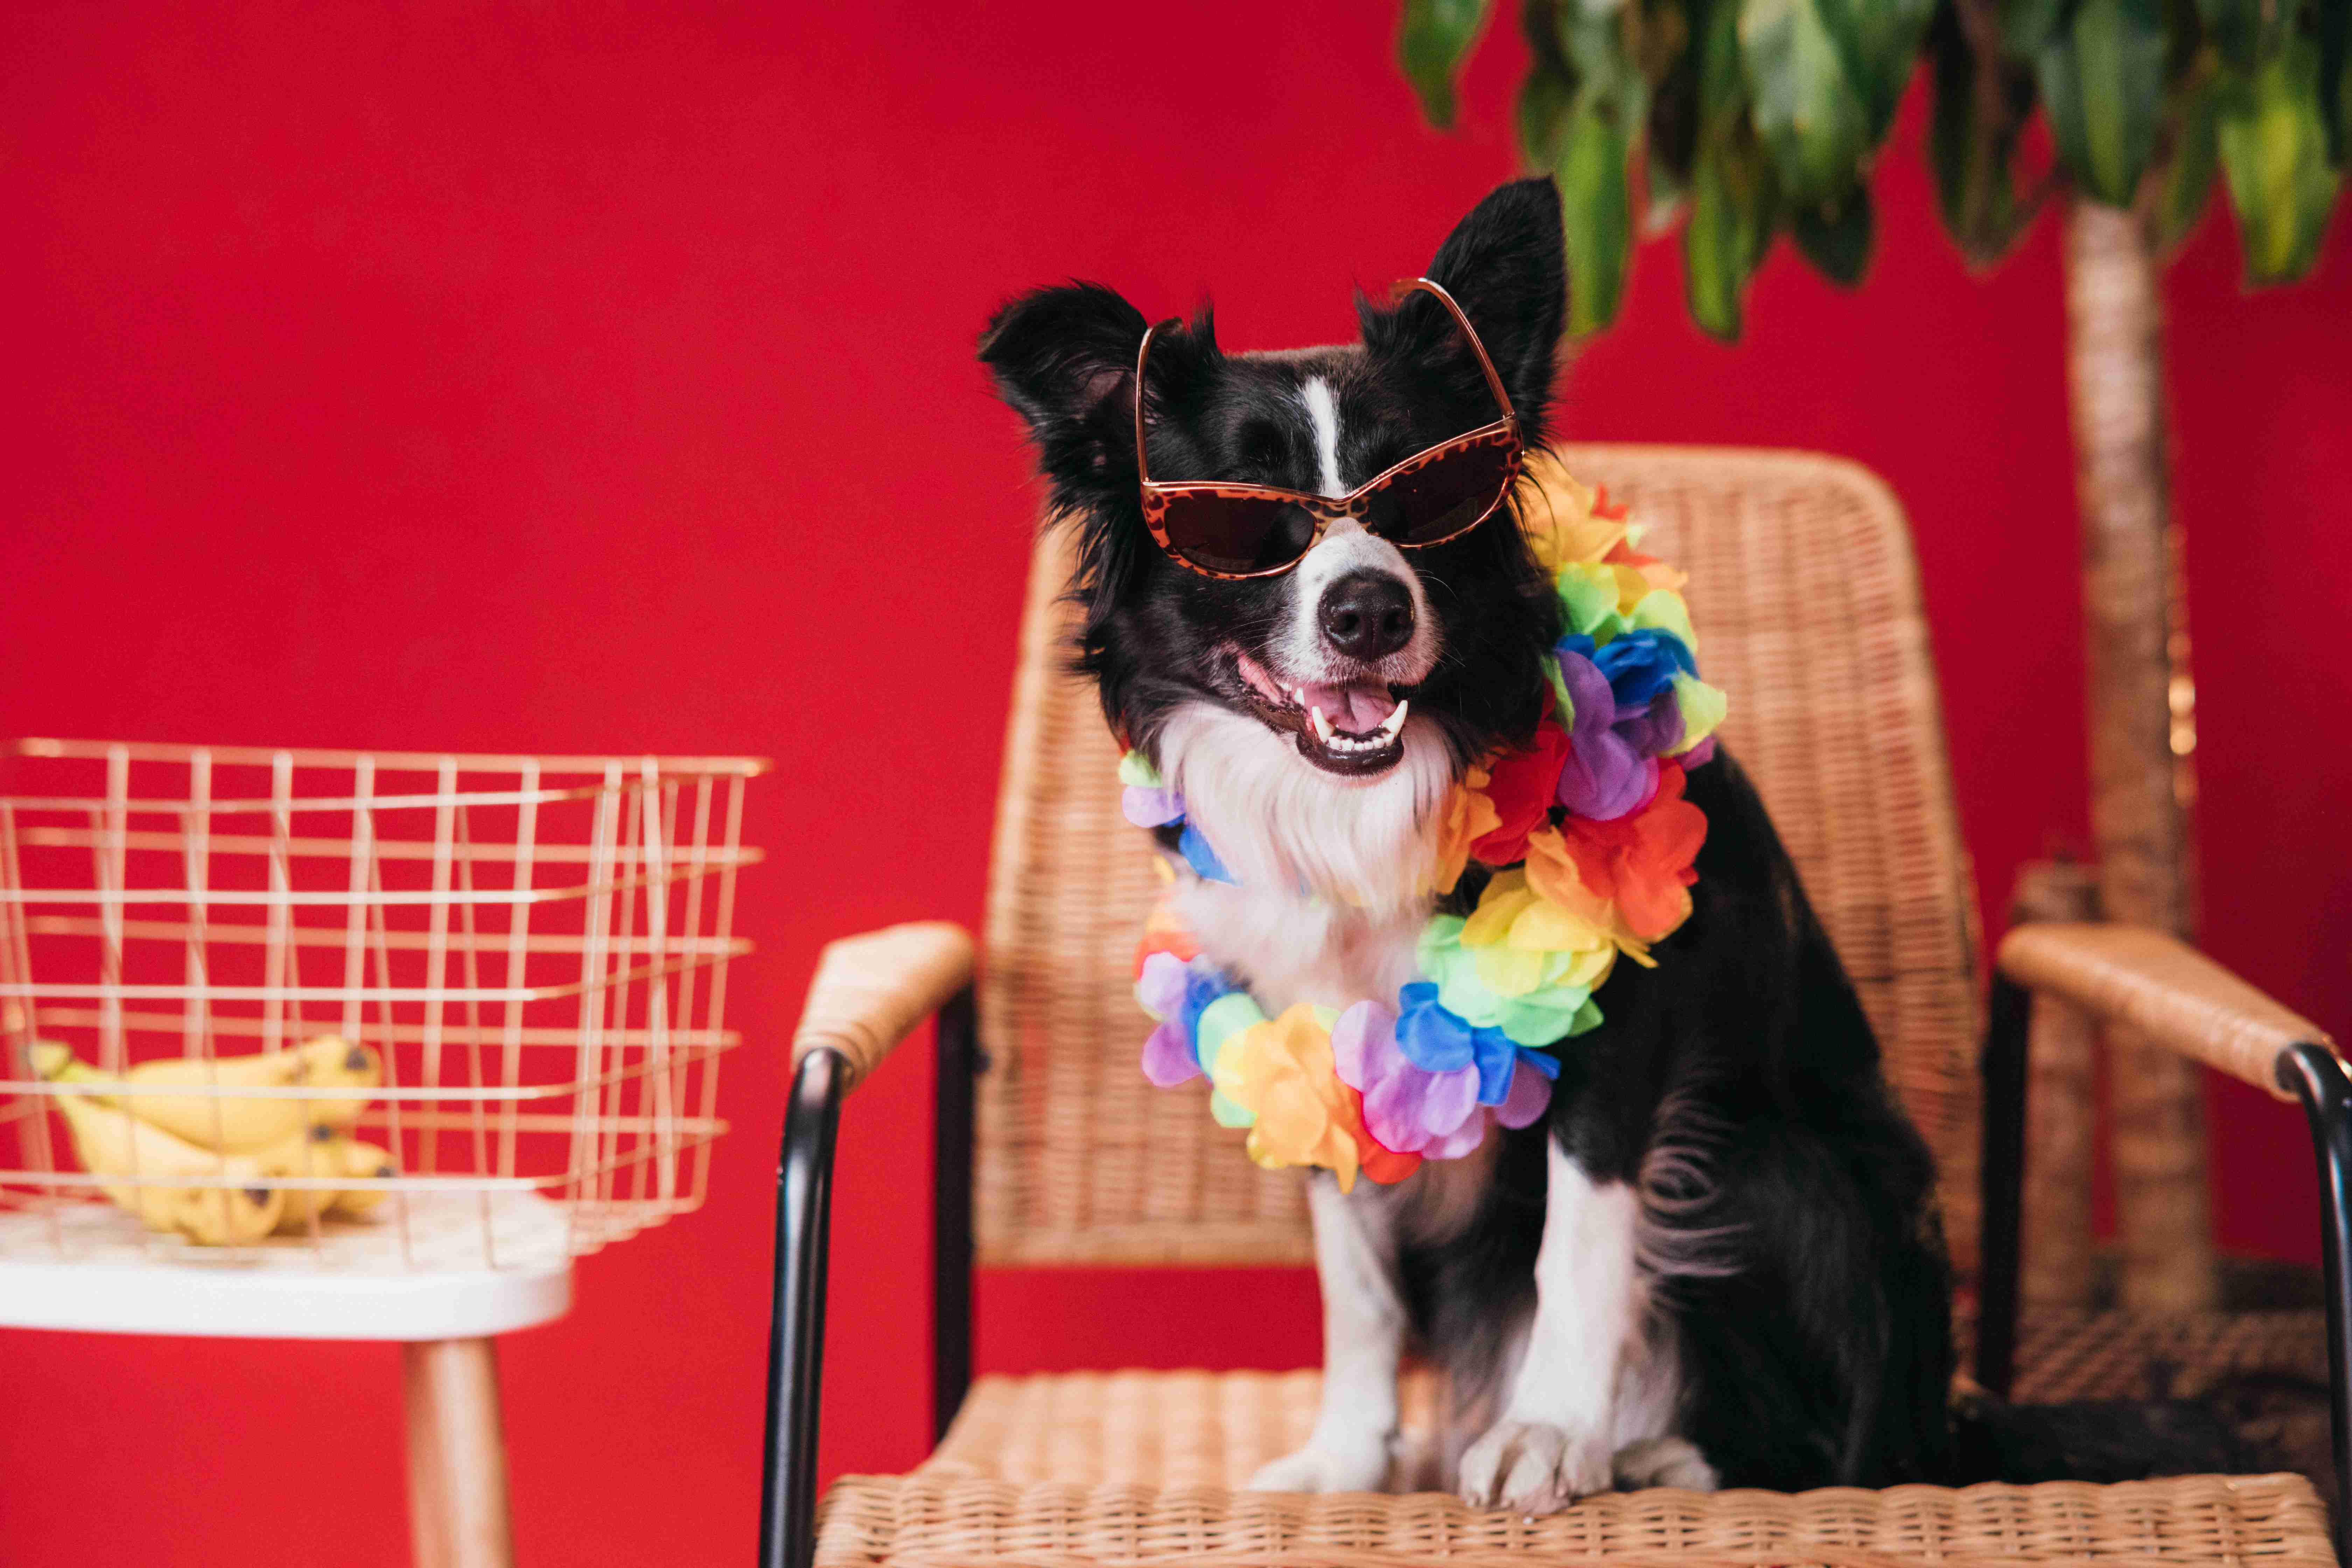 Border Collie Training: How to Teach Your Dog to Feel at Ease with Strangers